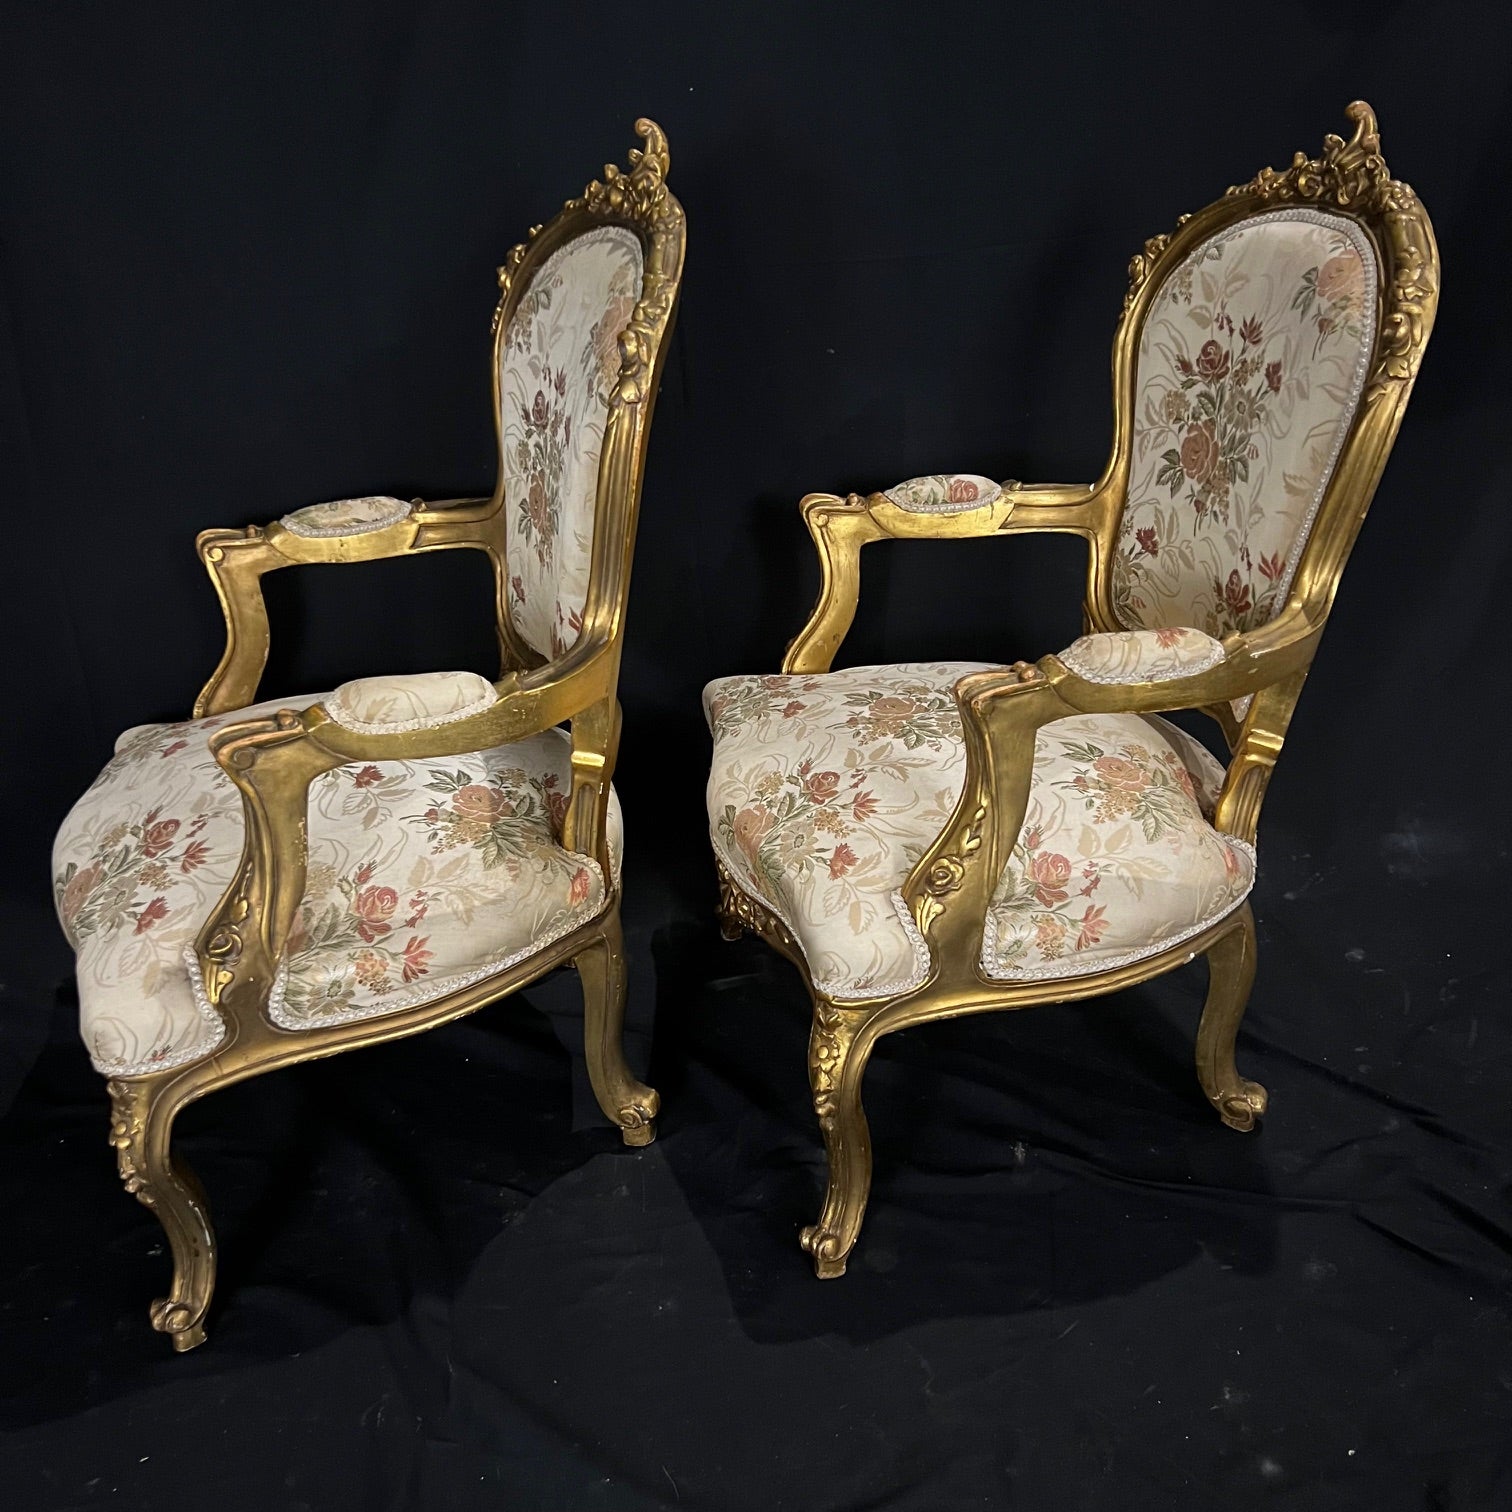 Two mid century Louis XV style giltwood fauteuils or open armchairs, each with a cartouche back, surmounted with floral carving, scrolling arms and shaped seat frames raised on cabriole legs. Upholstered in a polychrome floral fabric. # 3688
The